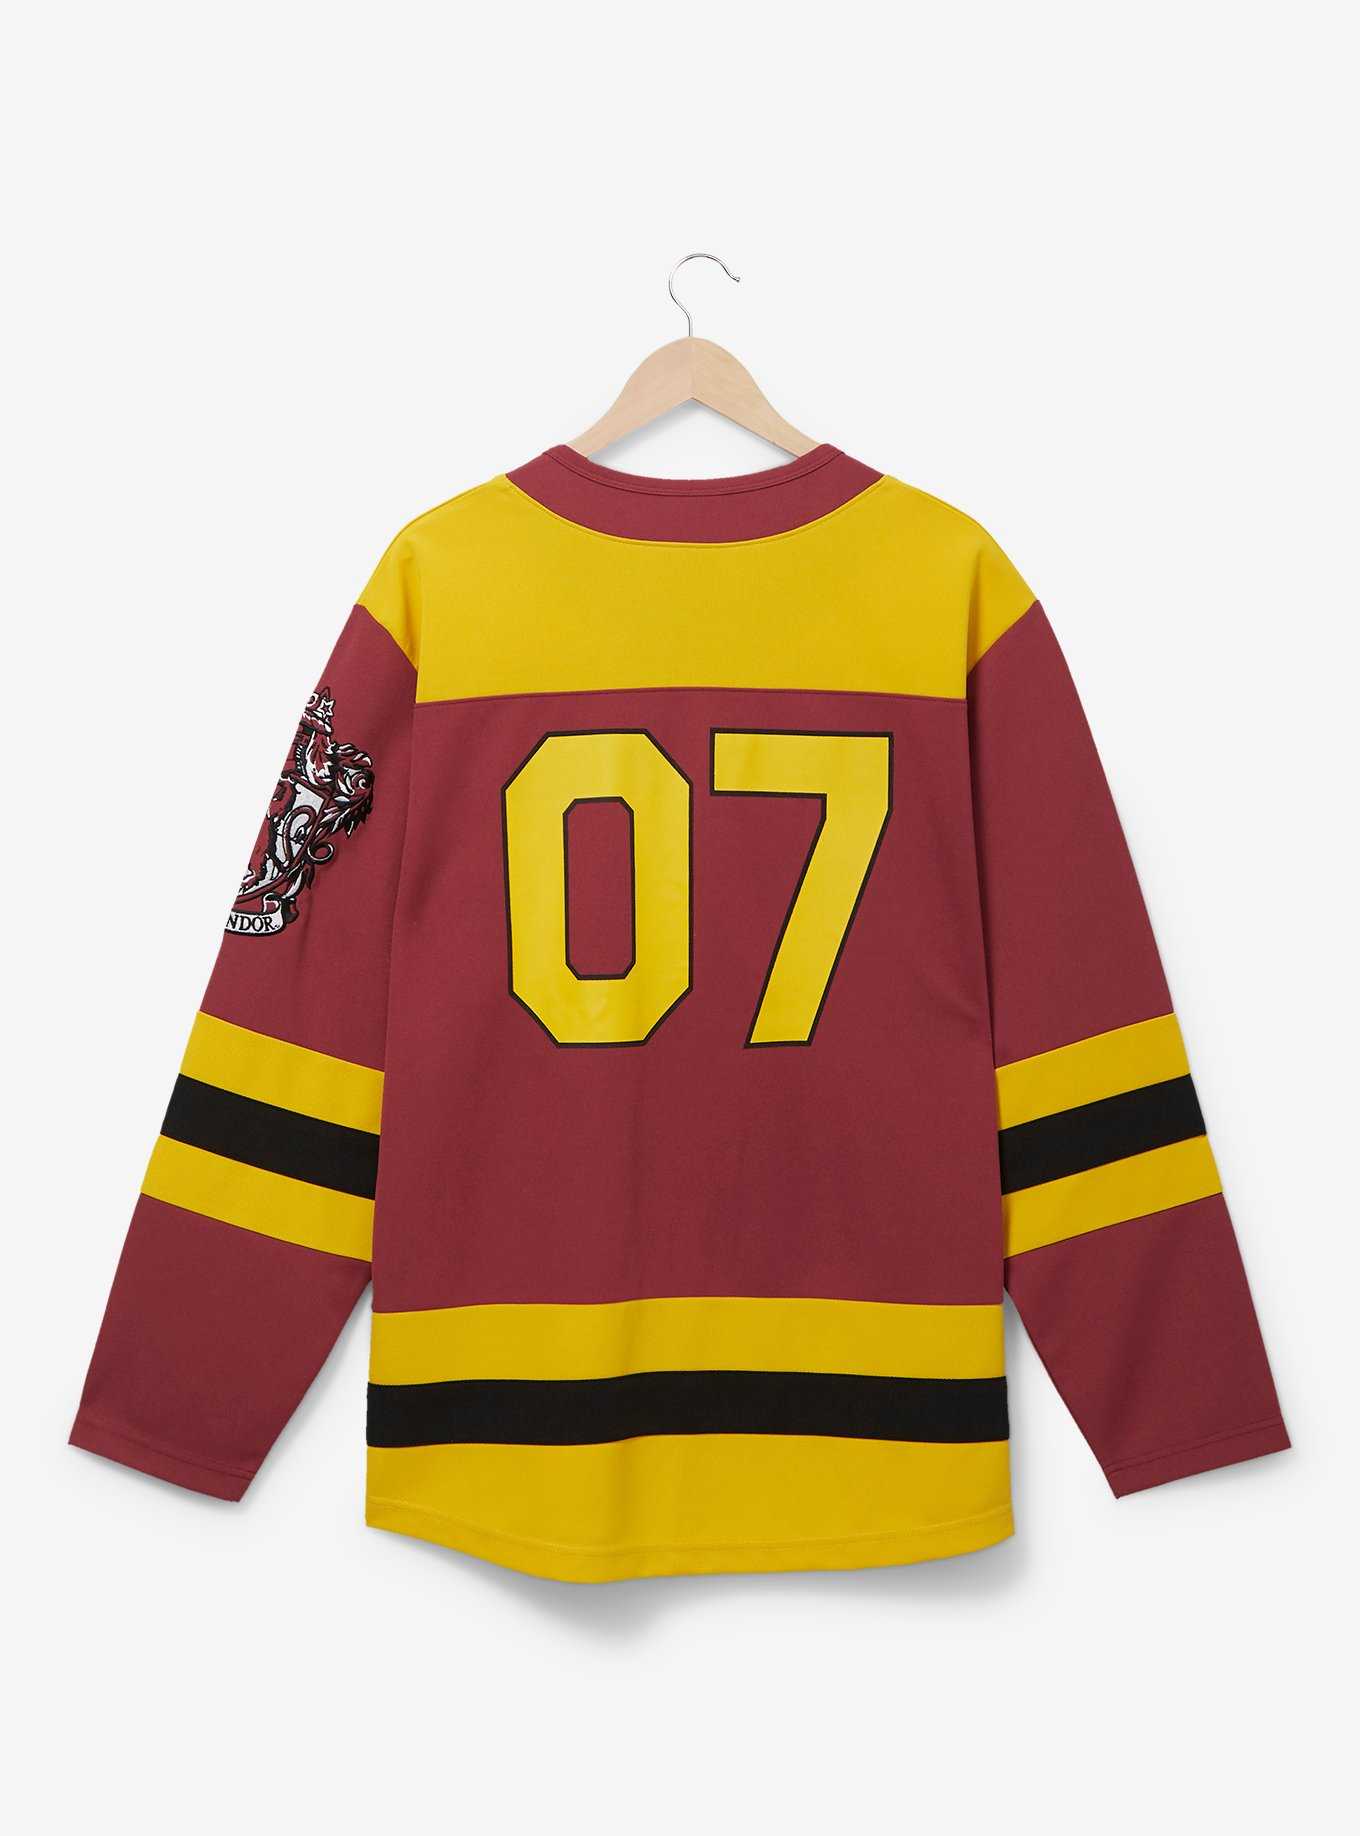 Harry Potter Gryffindor Hockey Jersey - BoxLunch Exclusive, , hi-res